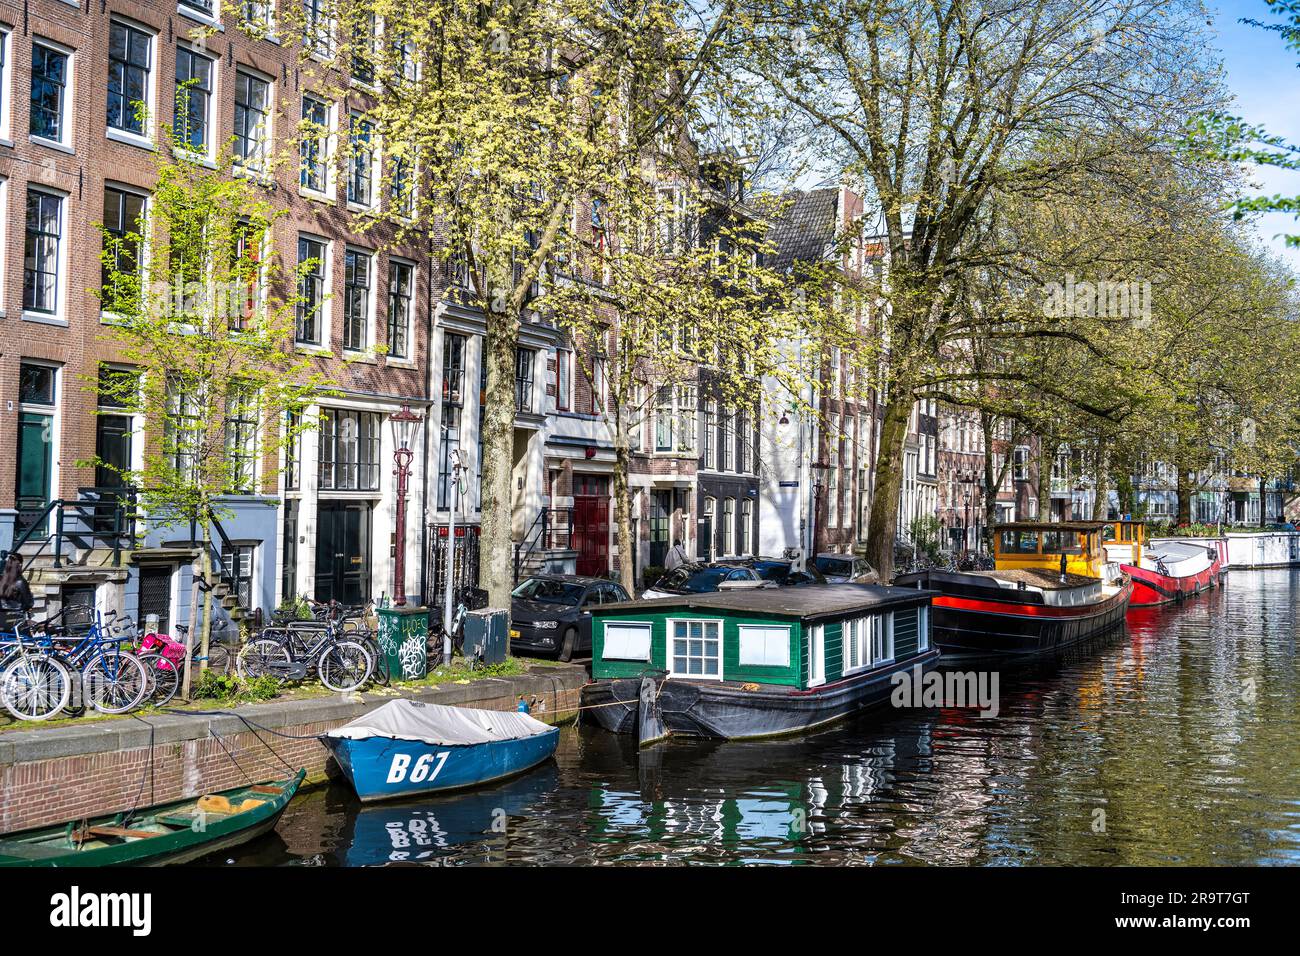 houseboats on the Kloveiniersburgwal canal in the Neiwmarkt area of Amsterdam Stock Photo